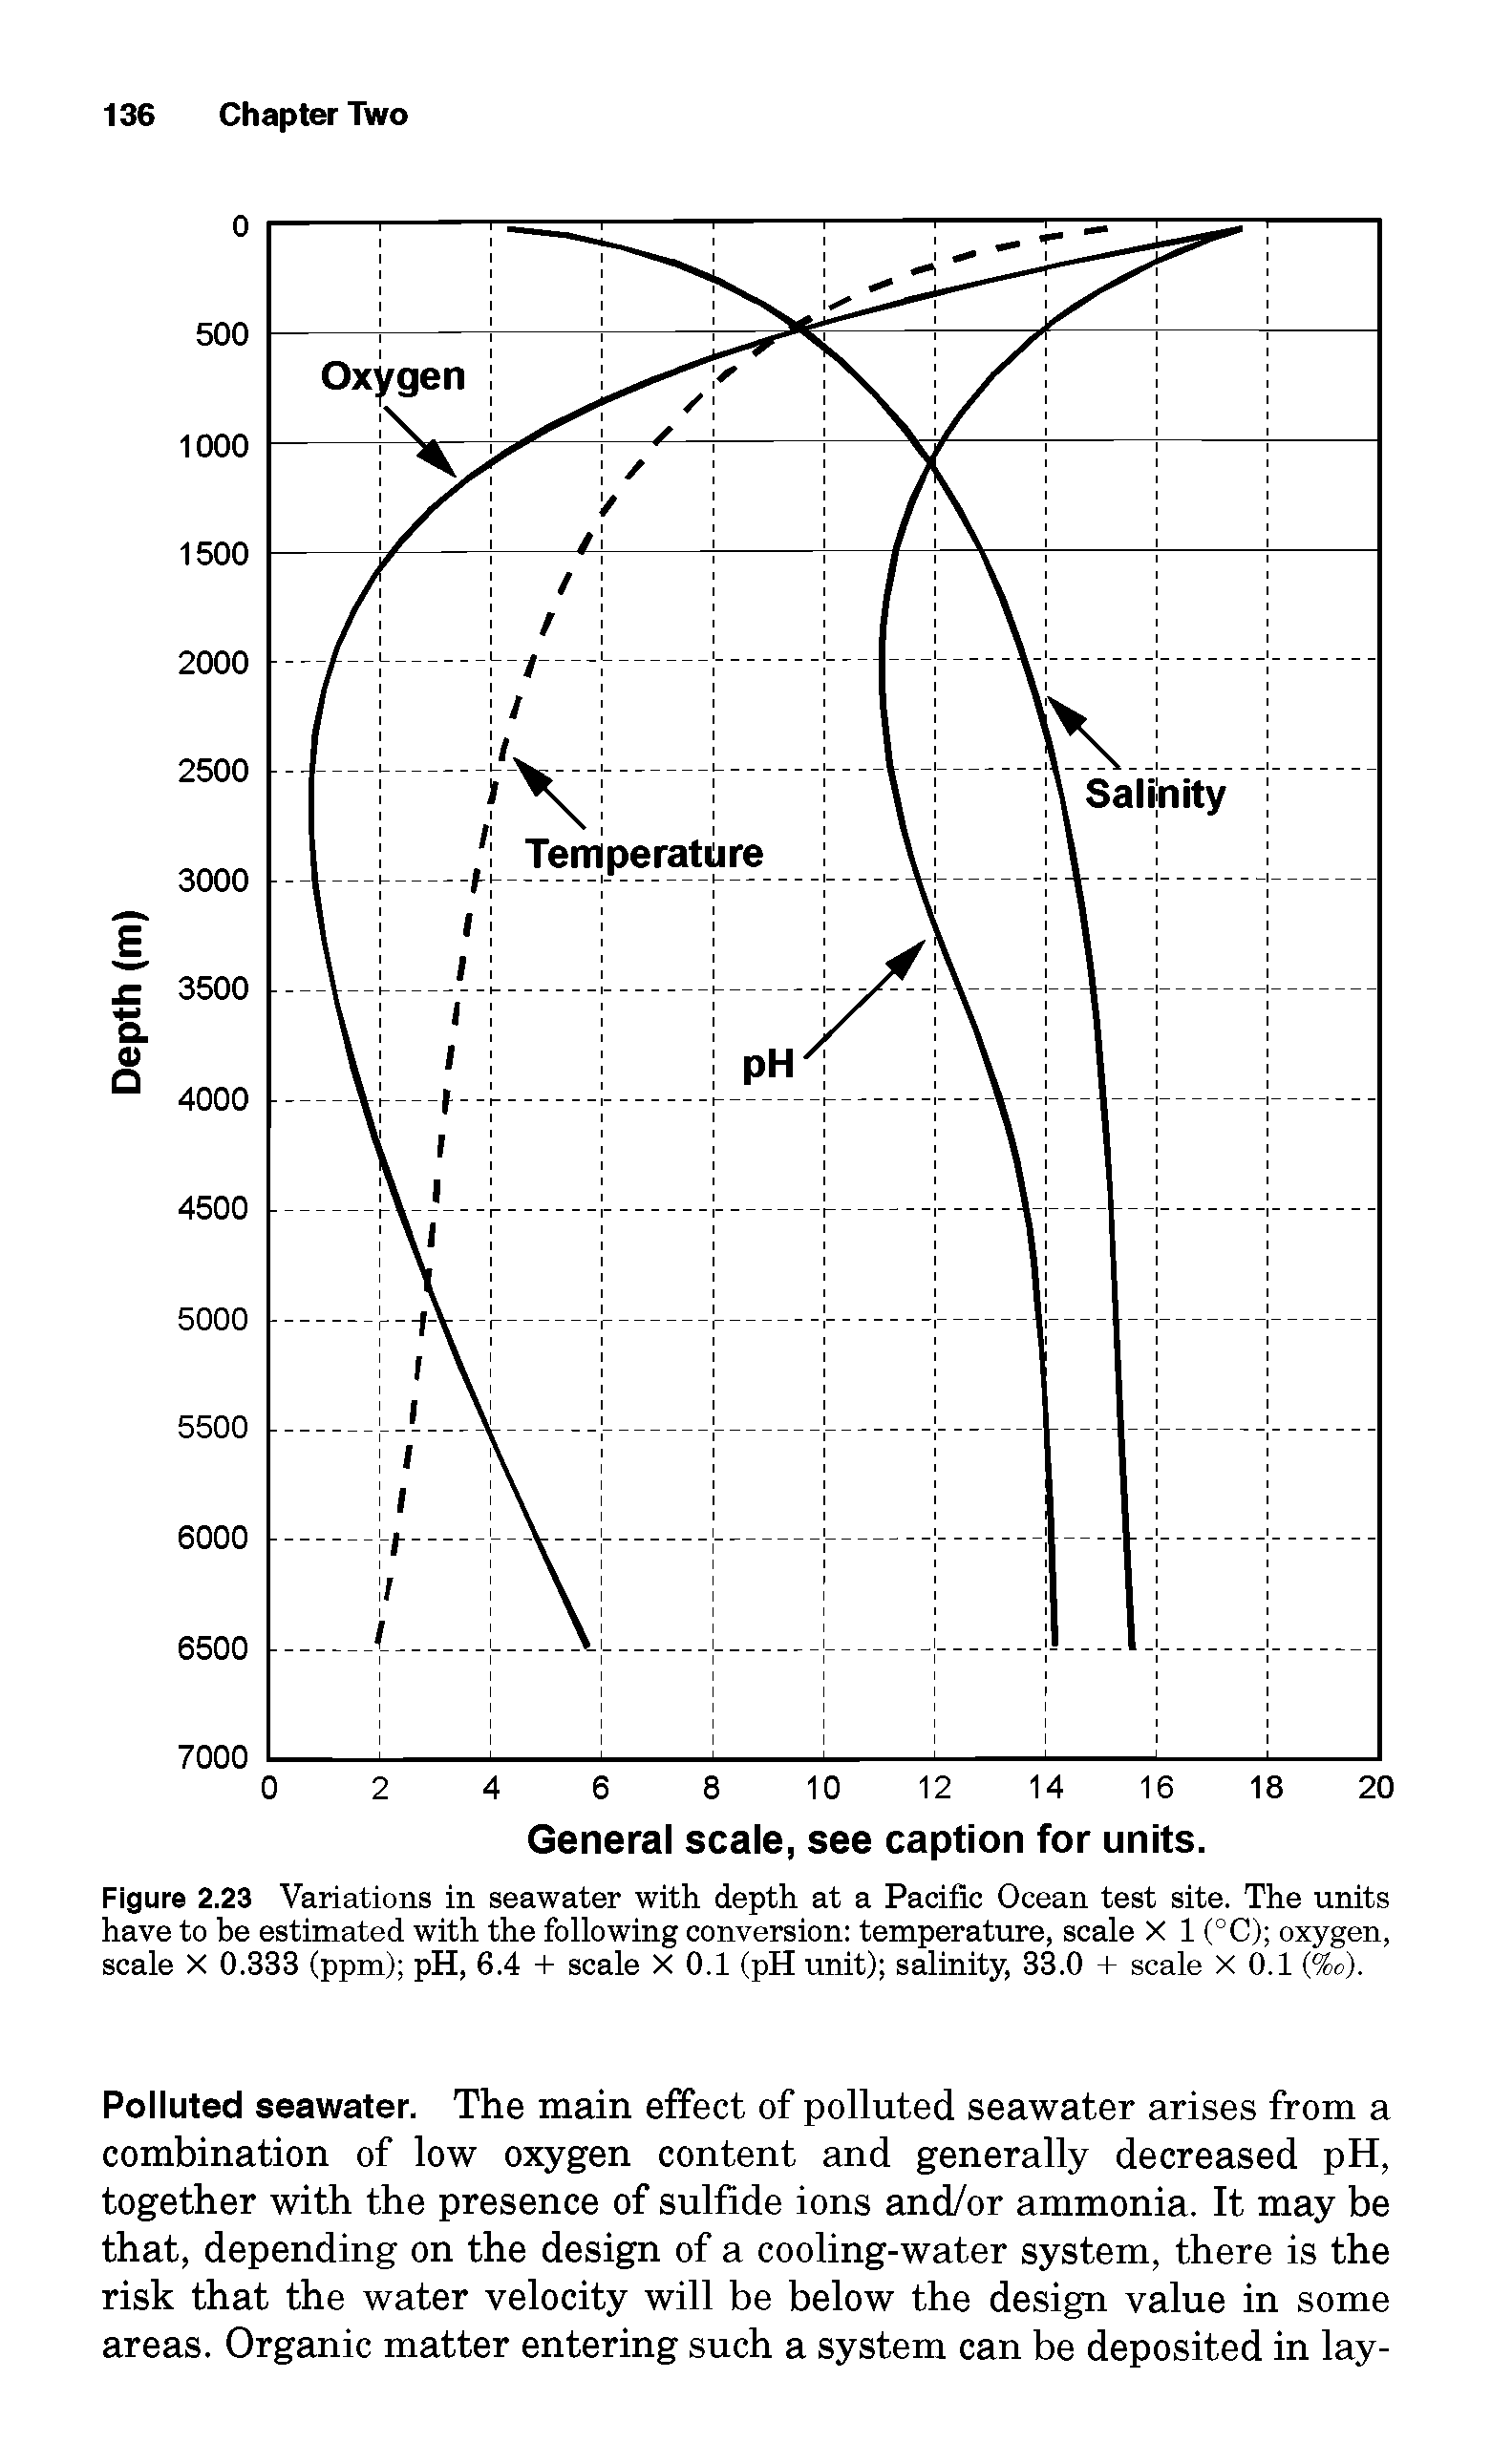 Figure 2.23 Variations in seawater with depth at a Pacific Ocean test site. The units have to be estimated with the following conversion temperature, scale X 1 (°C) oxygen, scale X 0.333 (ppm) pH, 6.4 + scale X 0.1 (pH unit) salinity, 33.0 + scale X 0.1 %o).